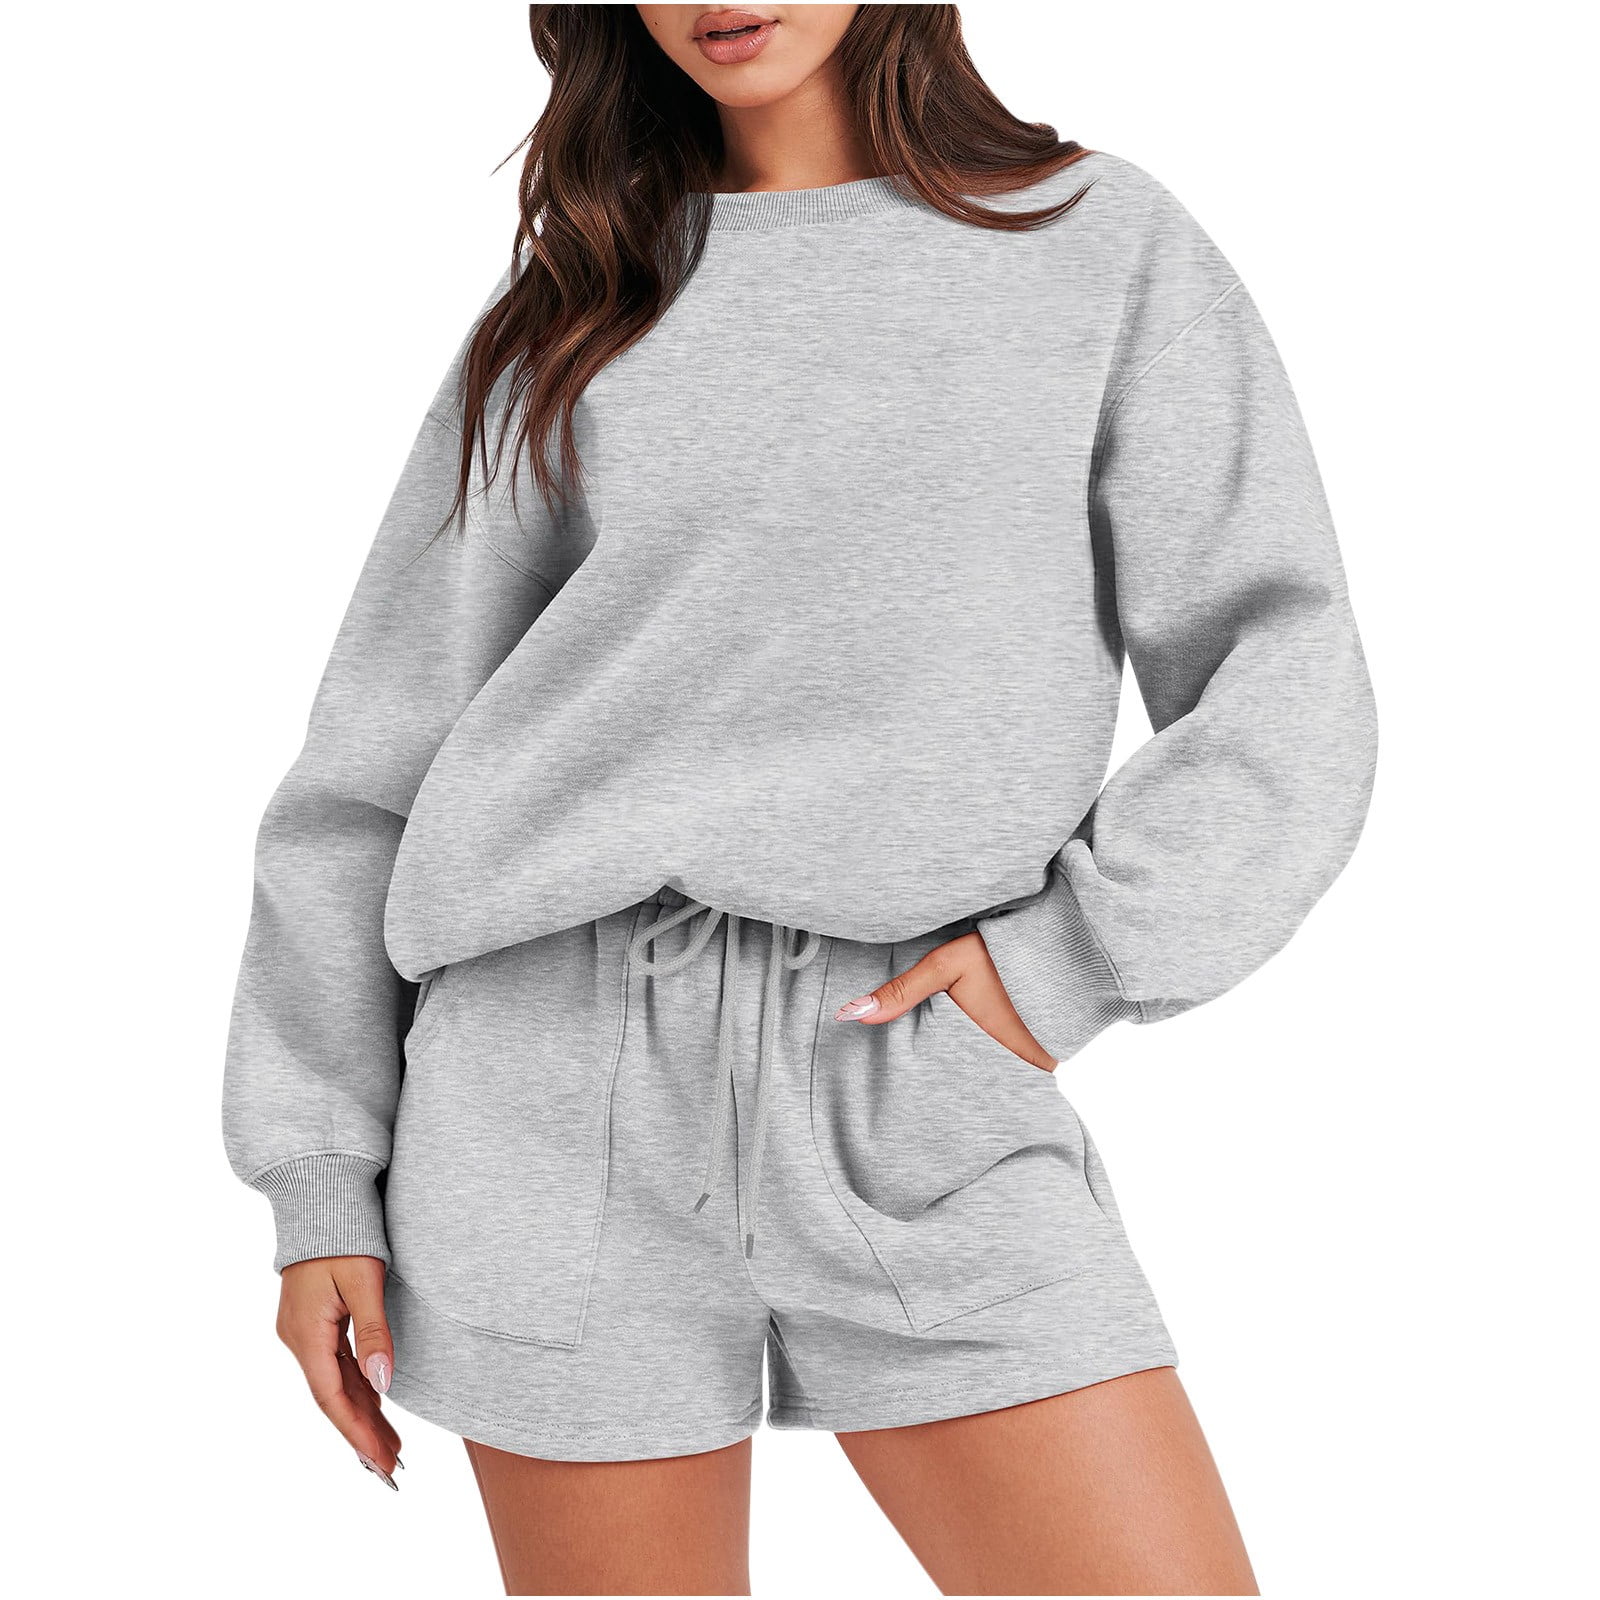 Women's - Shorts or Sport Bras or Pants or Hoodies and Sweatshirts or Short  Sleeves or Vests or Dresses and Rompers in Gray or Blue or White or Red or  Brown or